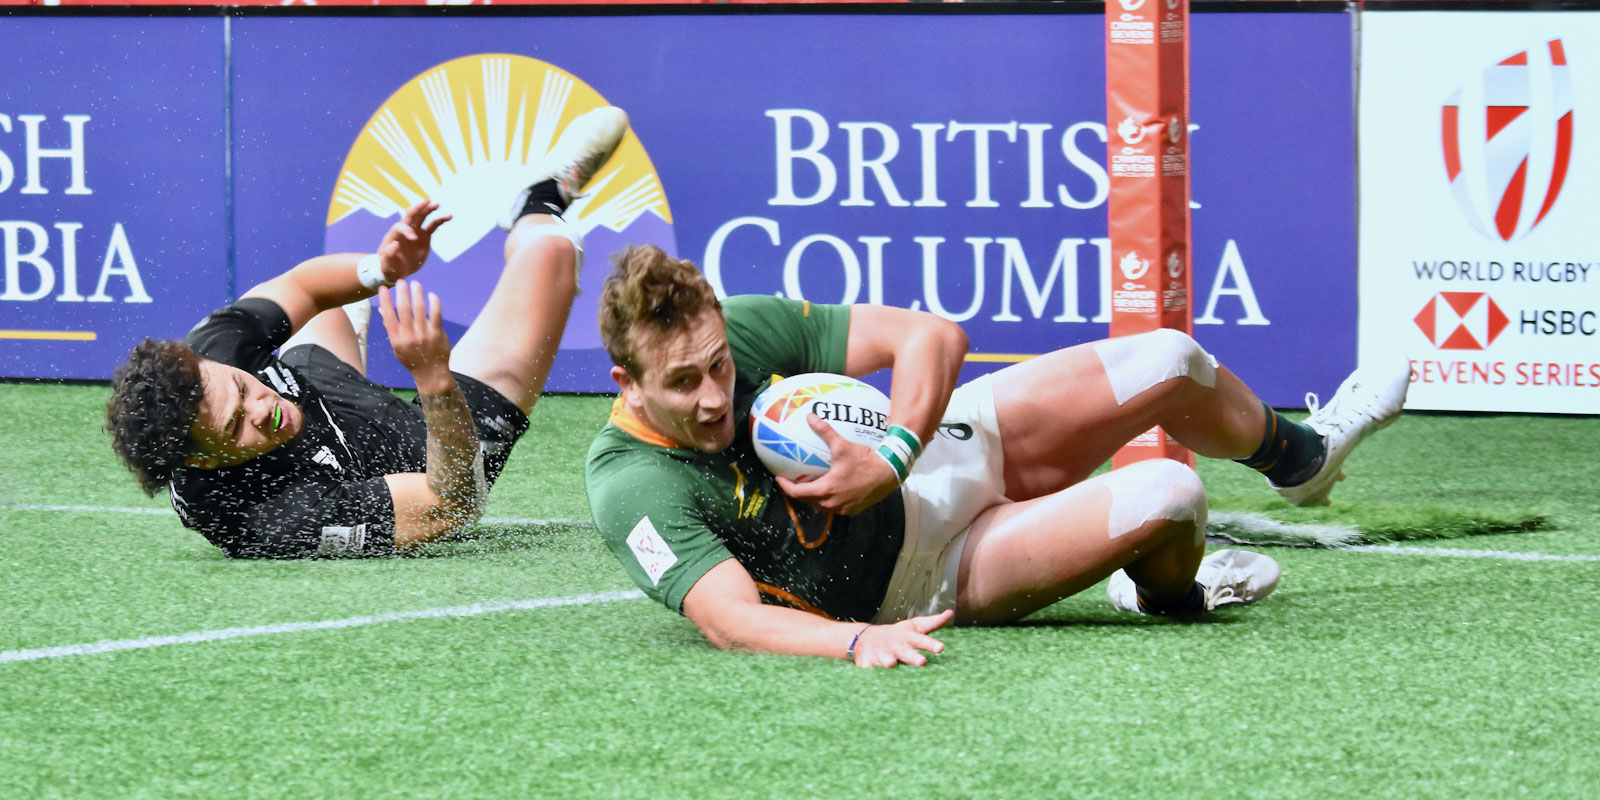 James Murphy scores the winning try against New Zealand.